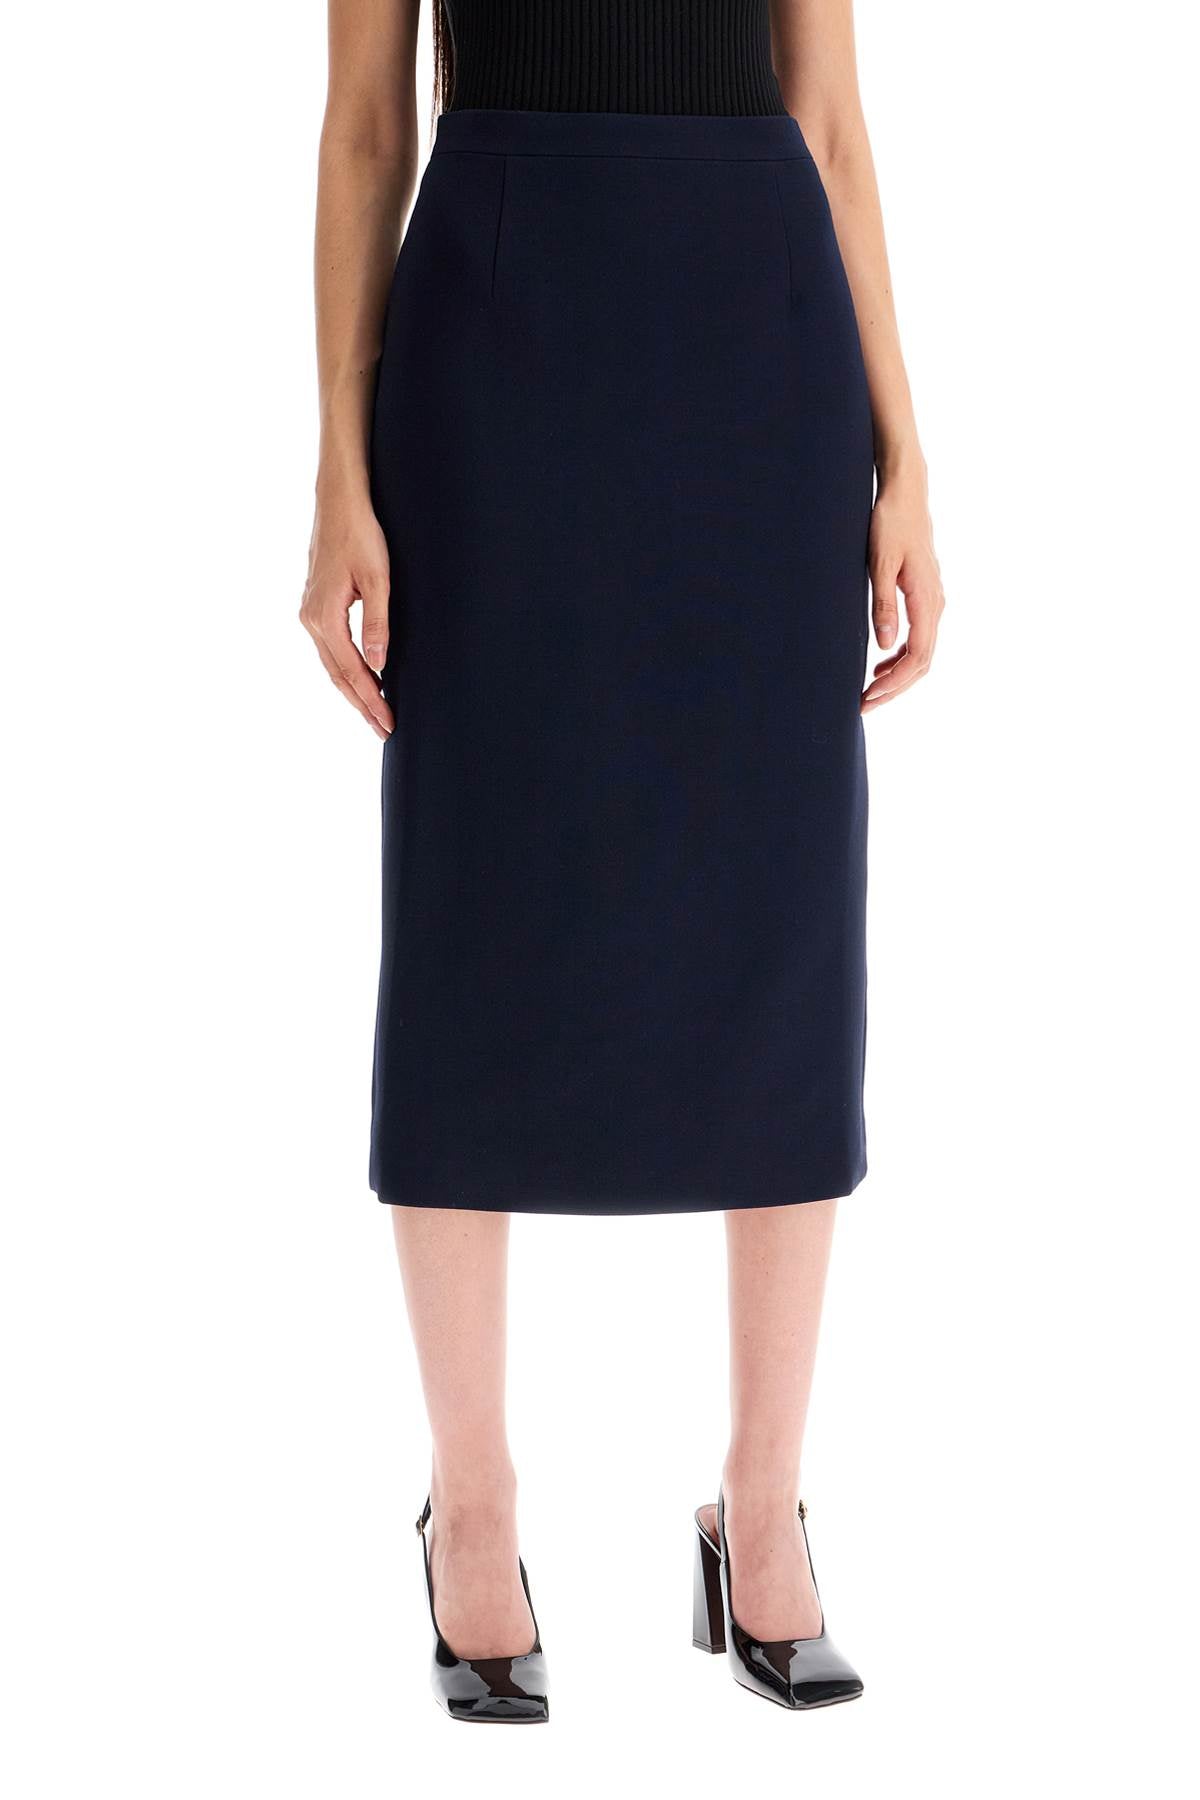 Alessandra Rich "virgin Wool Midi Skirtreplace With Double Quote   Blue